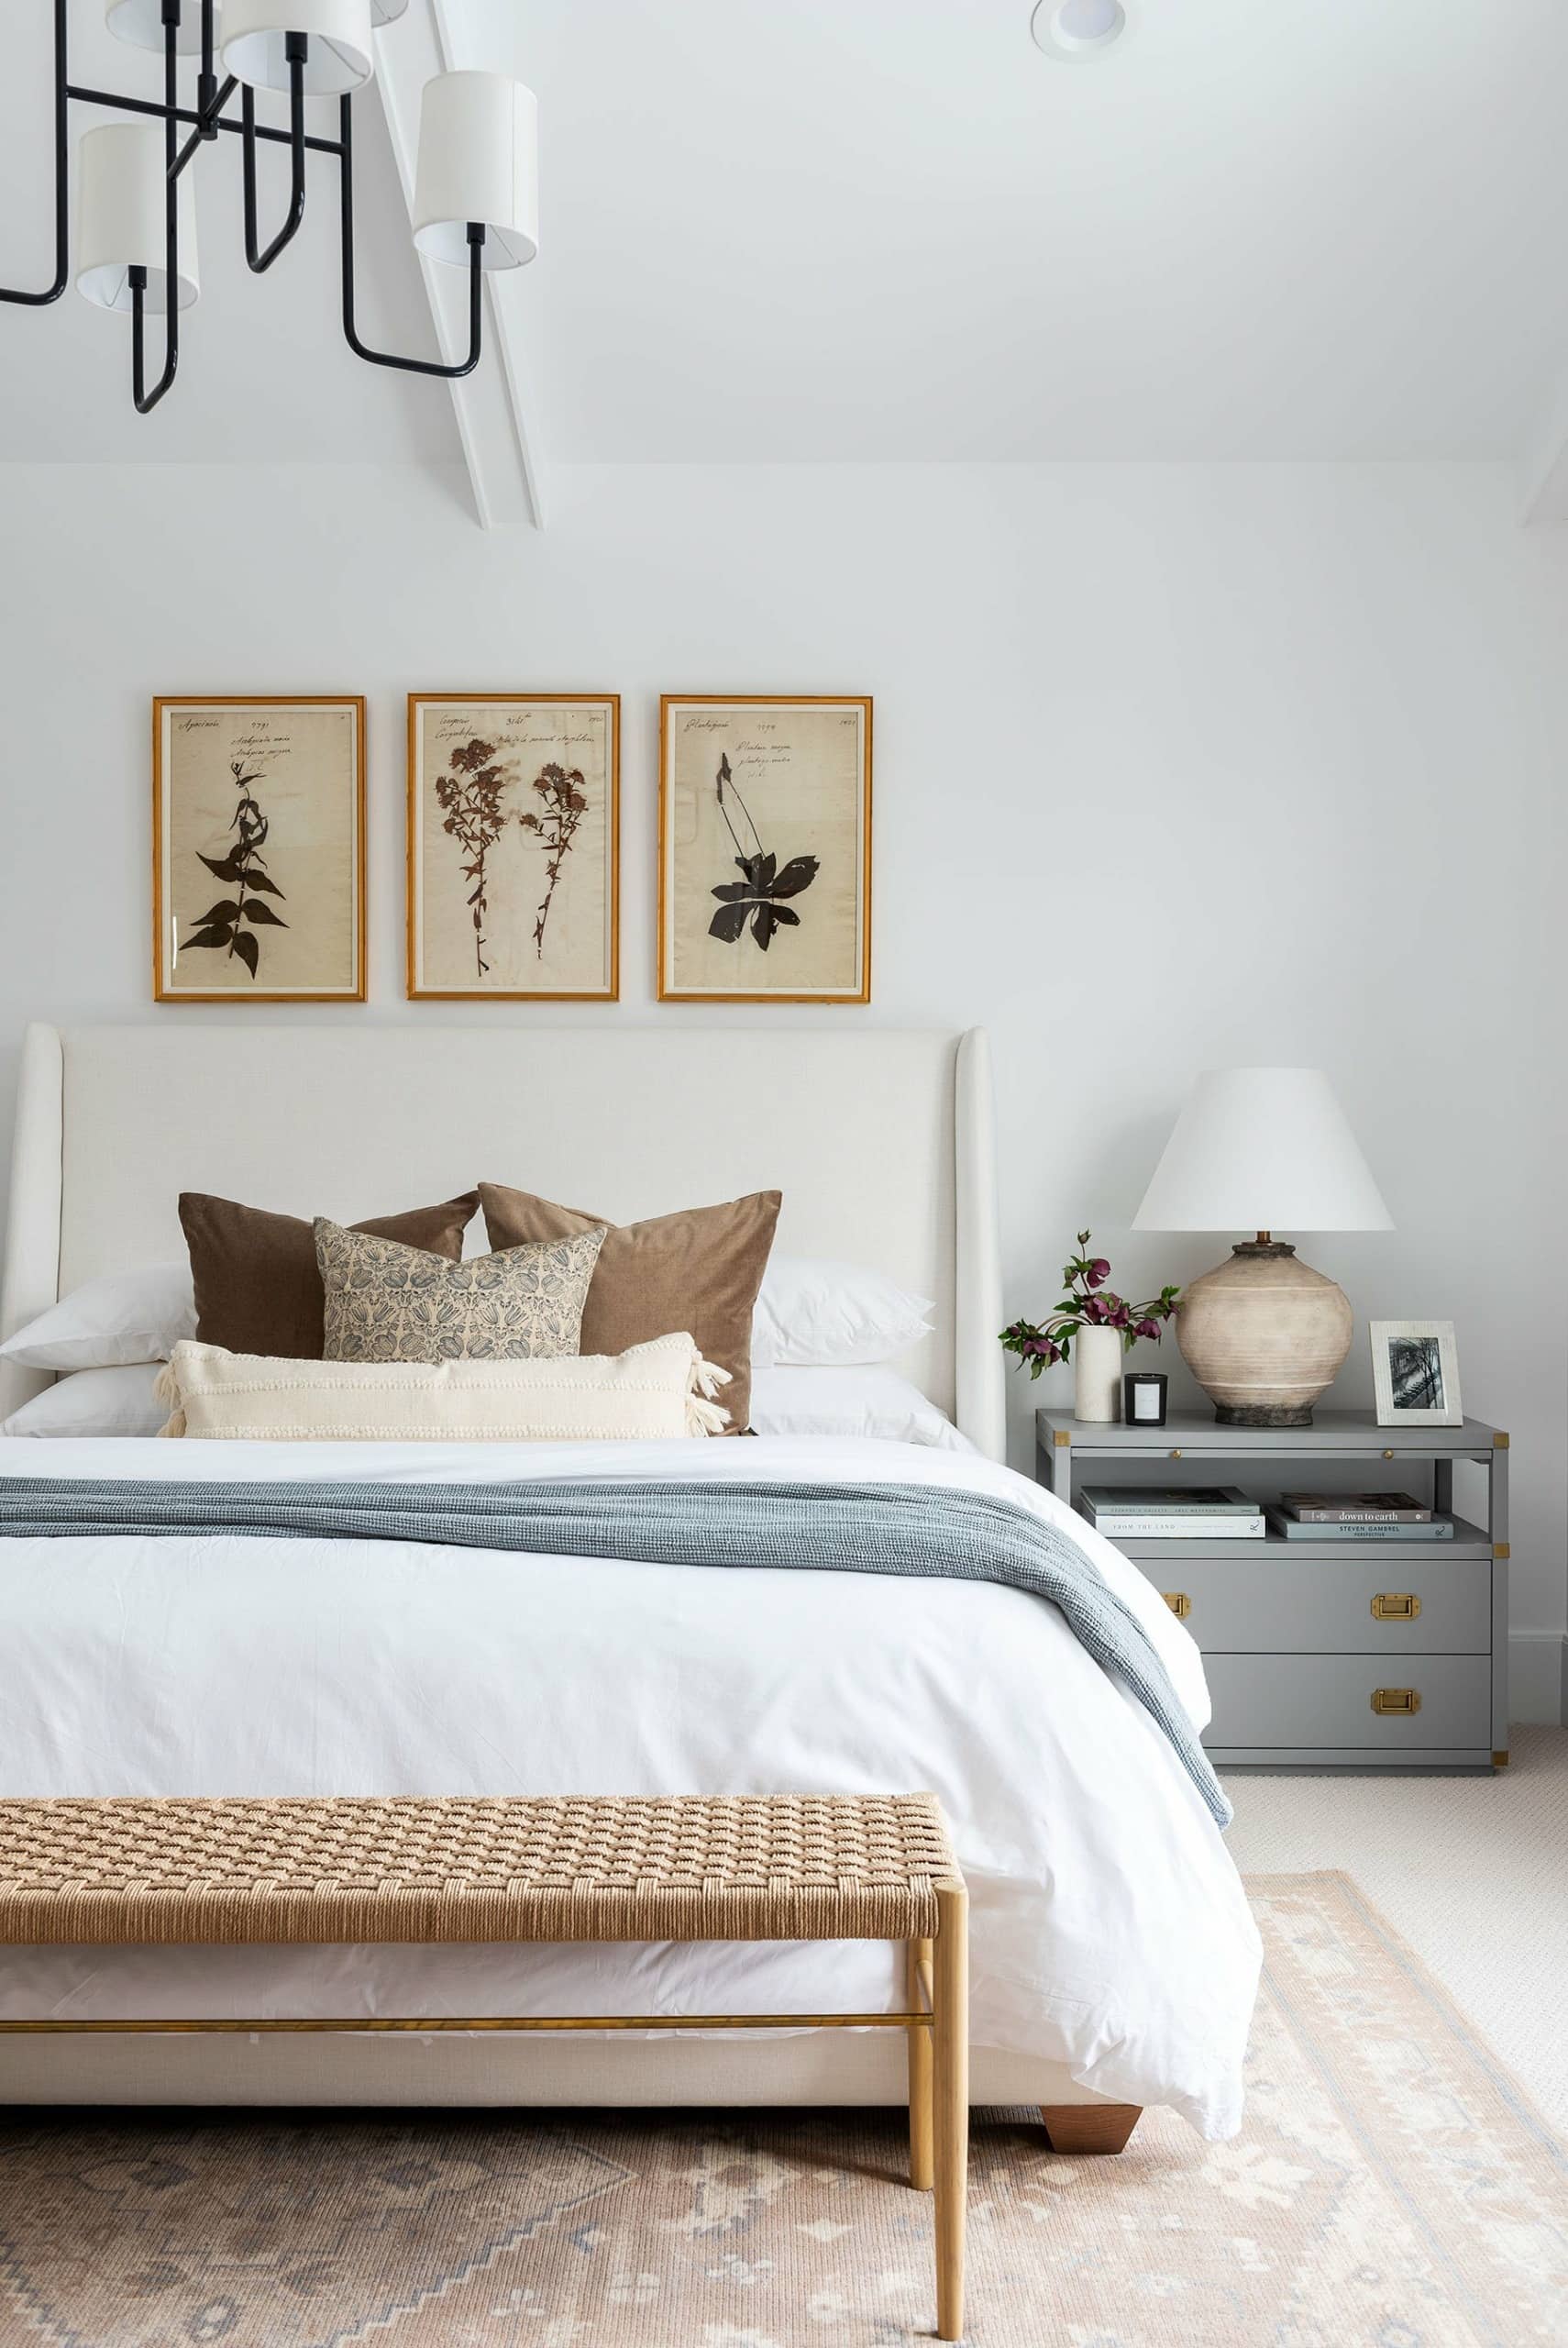 Studio McGee tips to style a king size bed